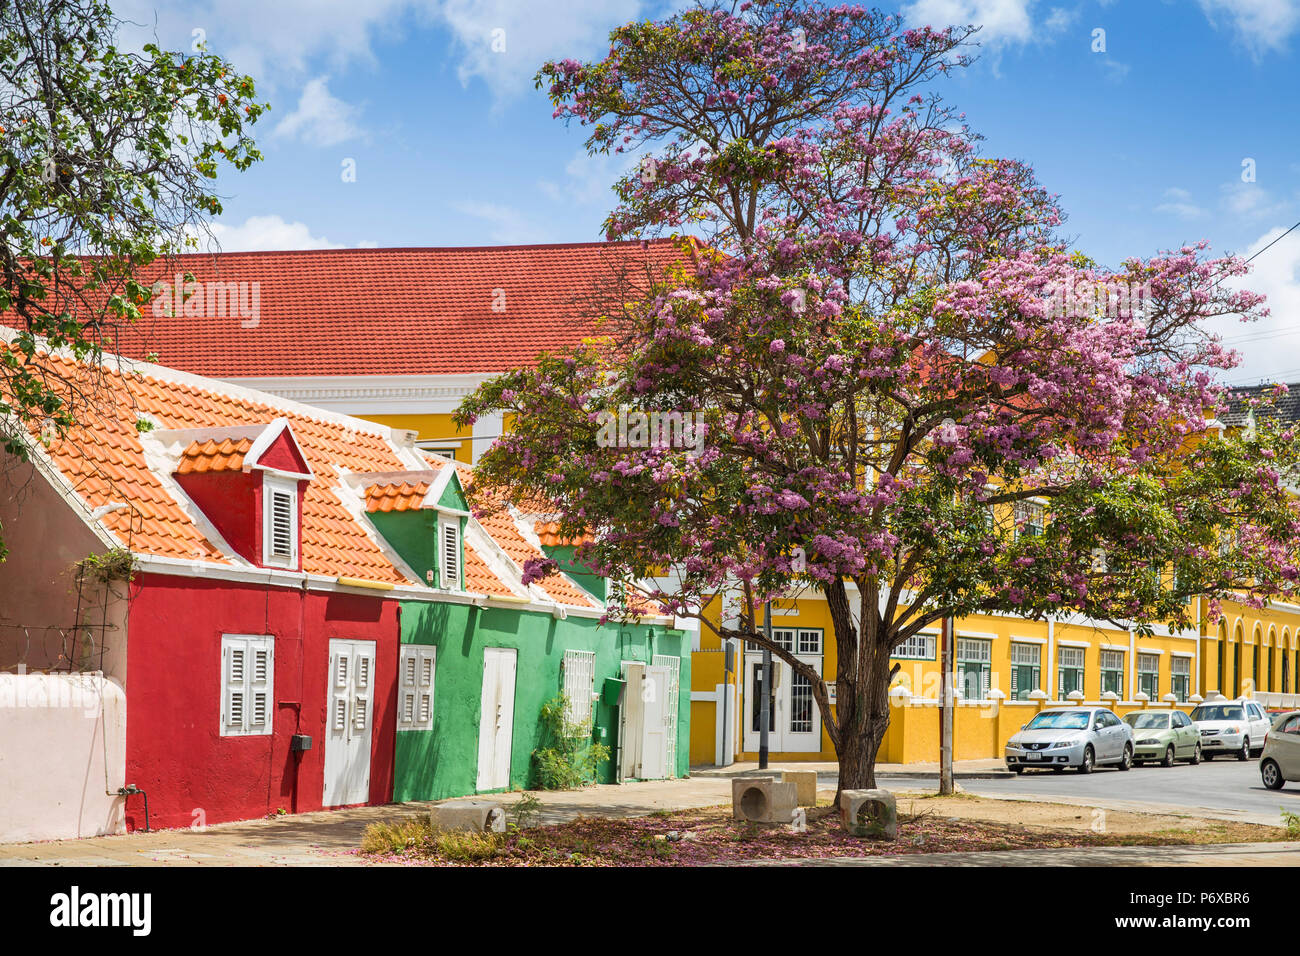 Curacao, Willemstad, Pietermaai, Row of colourful houses Stock Photo